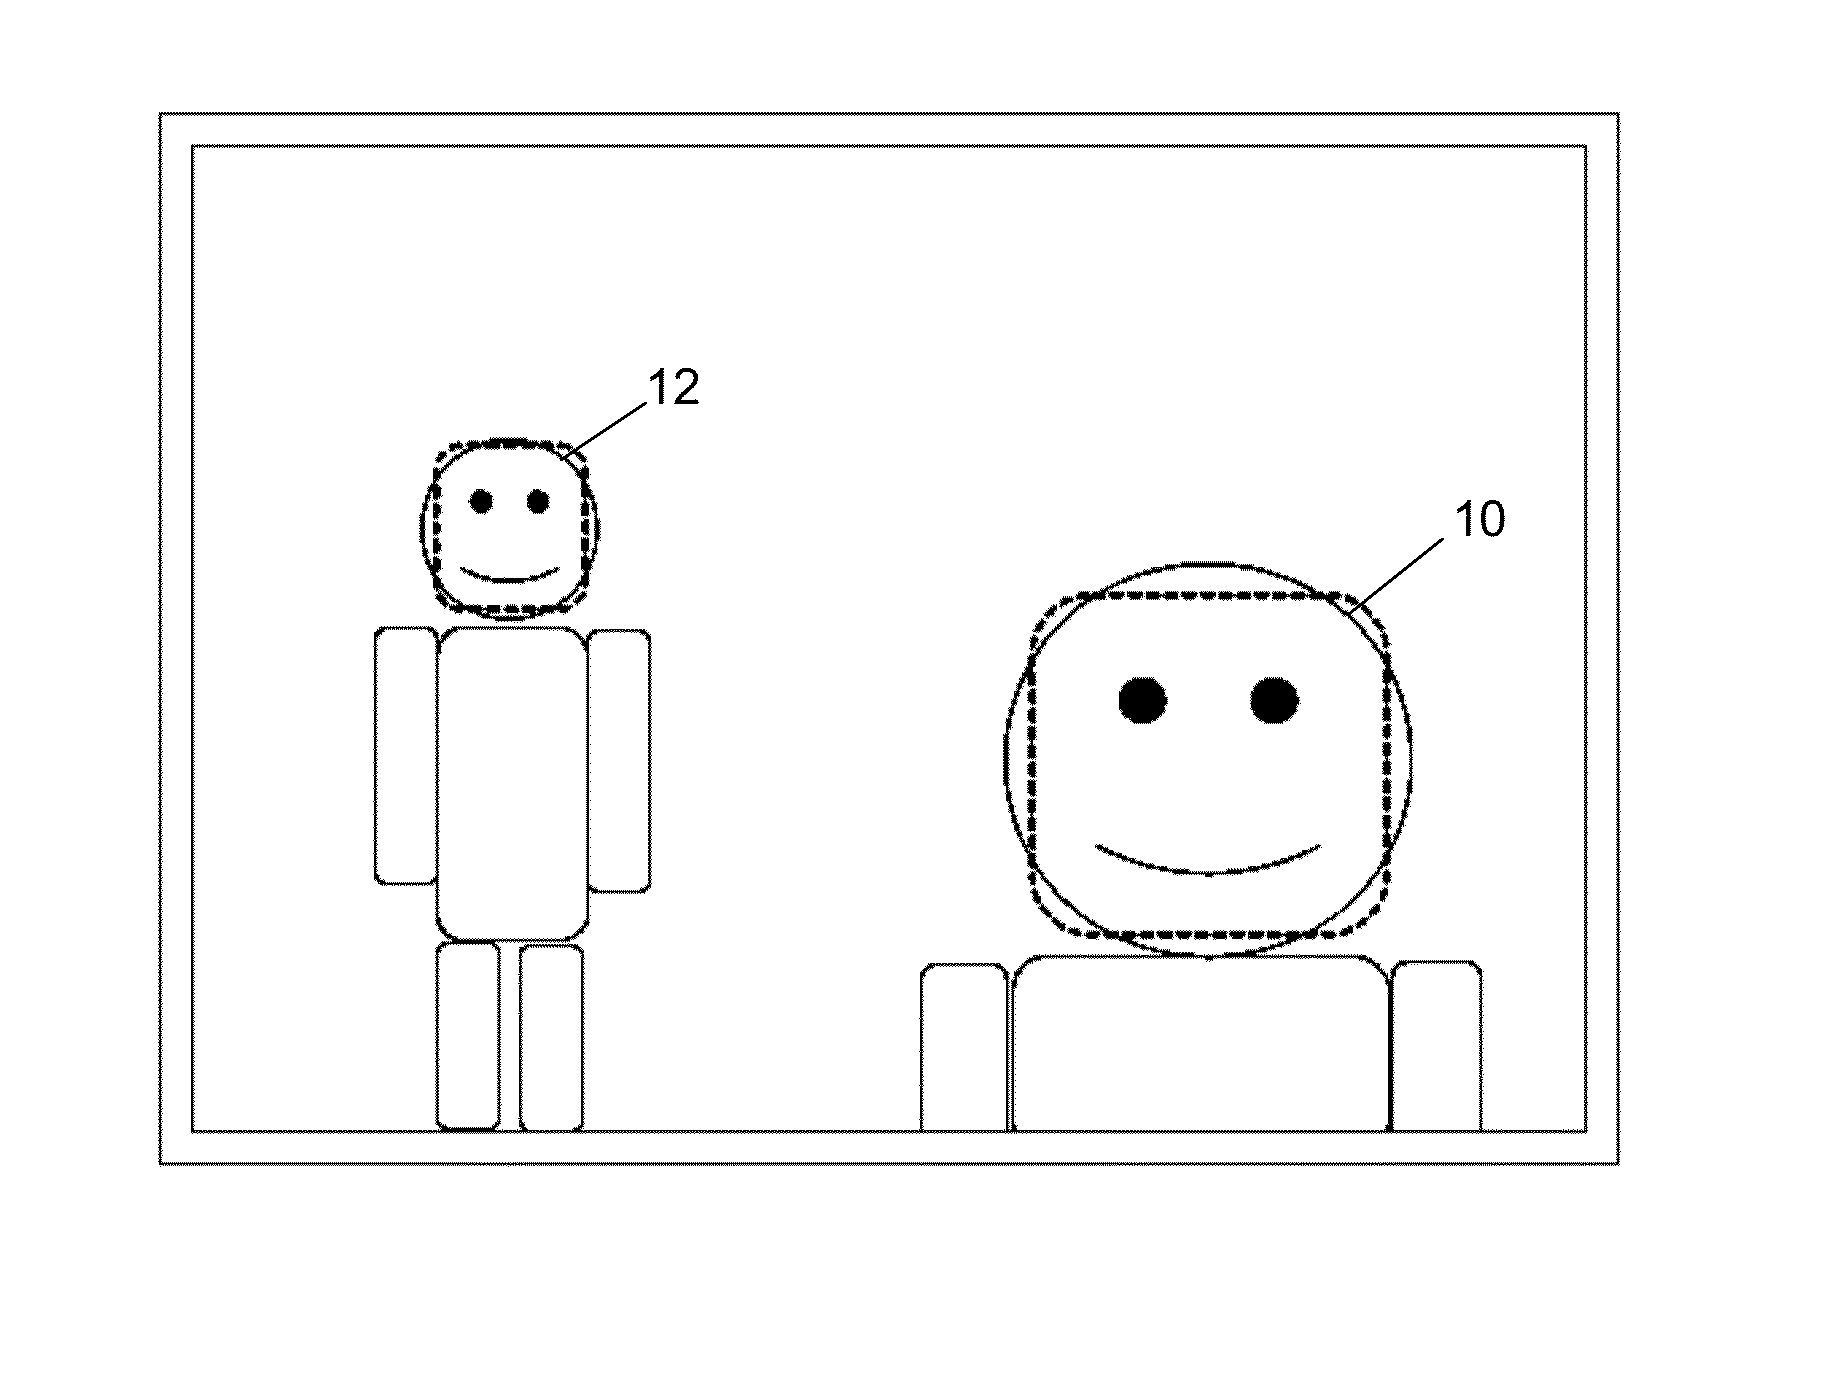 Method and Apparatus for Viewing Images